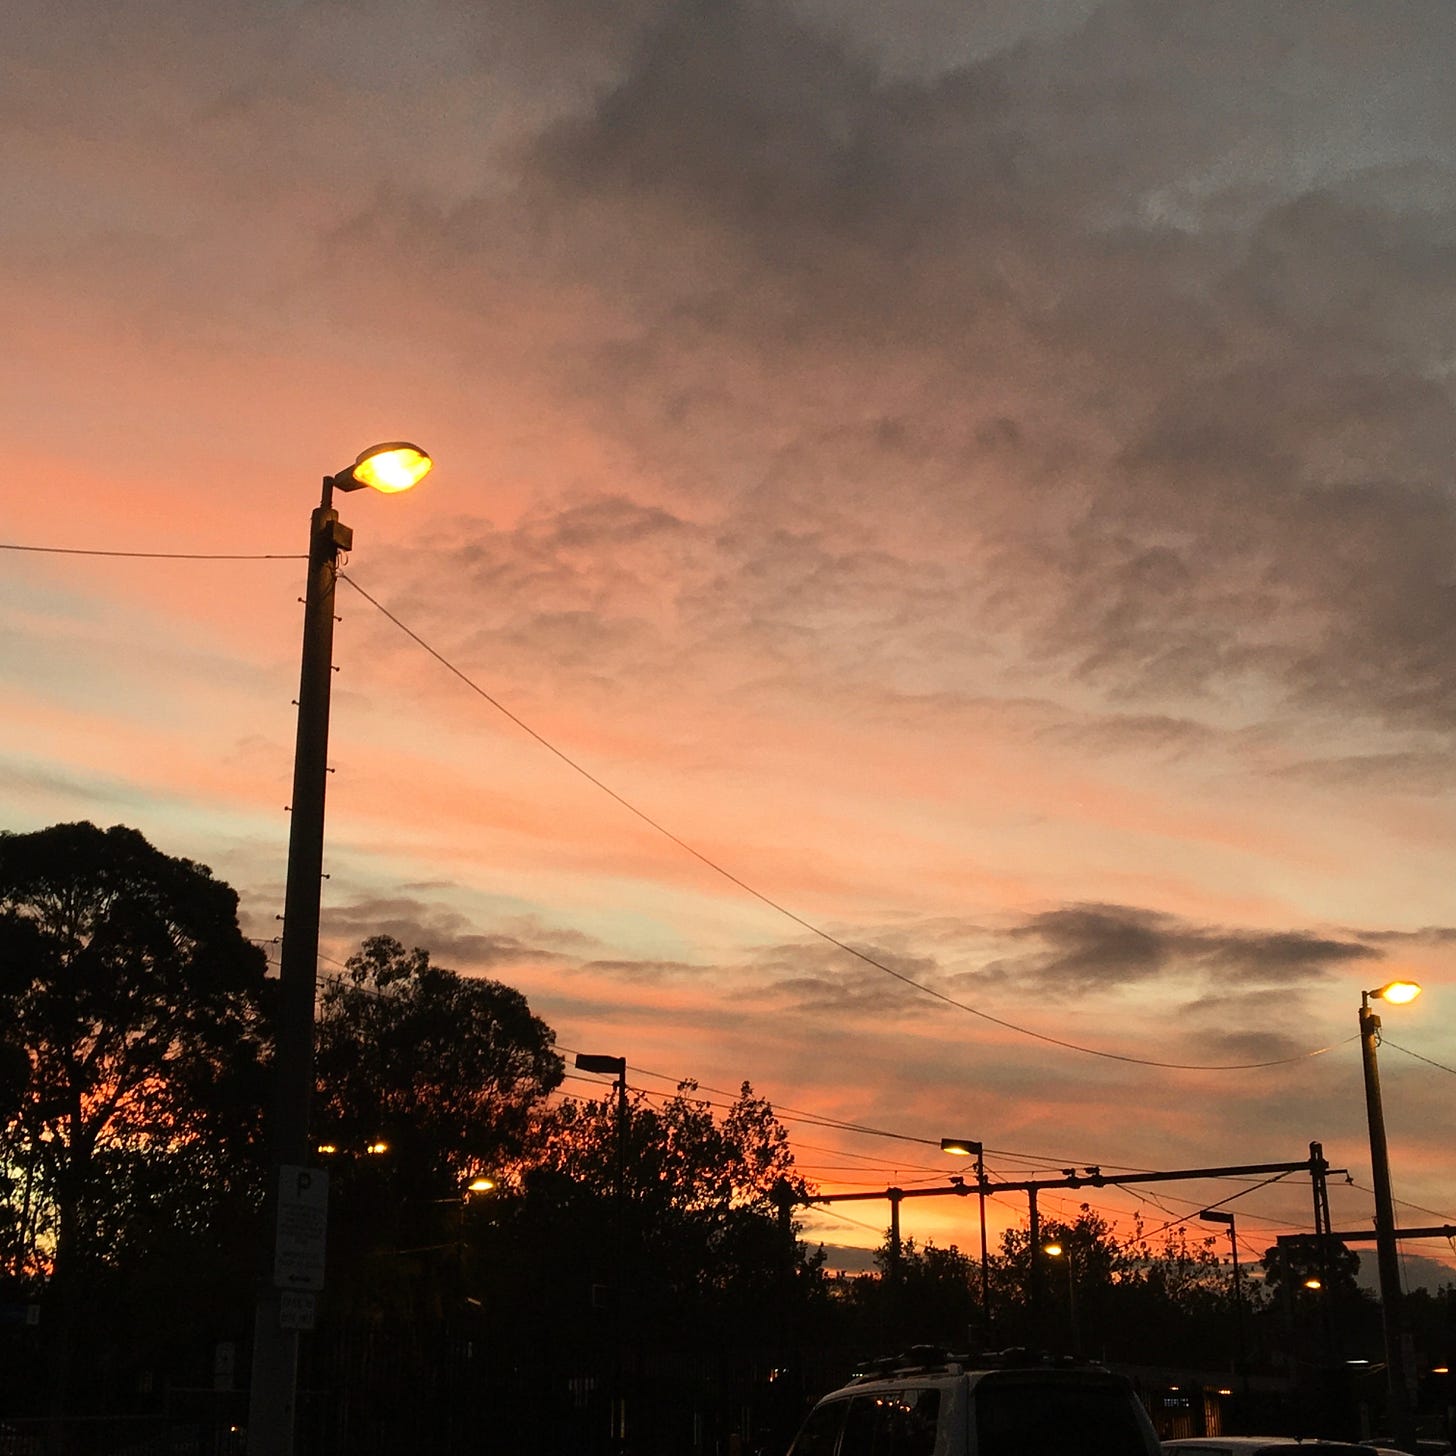 the sky, streaked in orange and grey. there are outlines of streetlines and trees